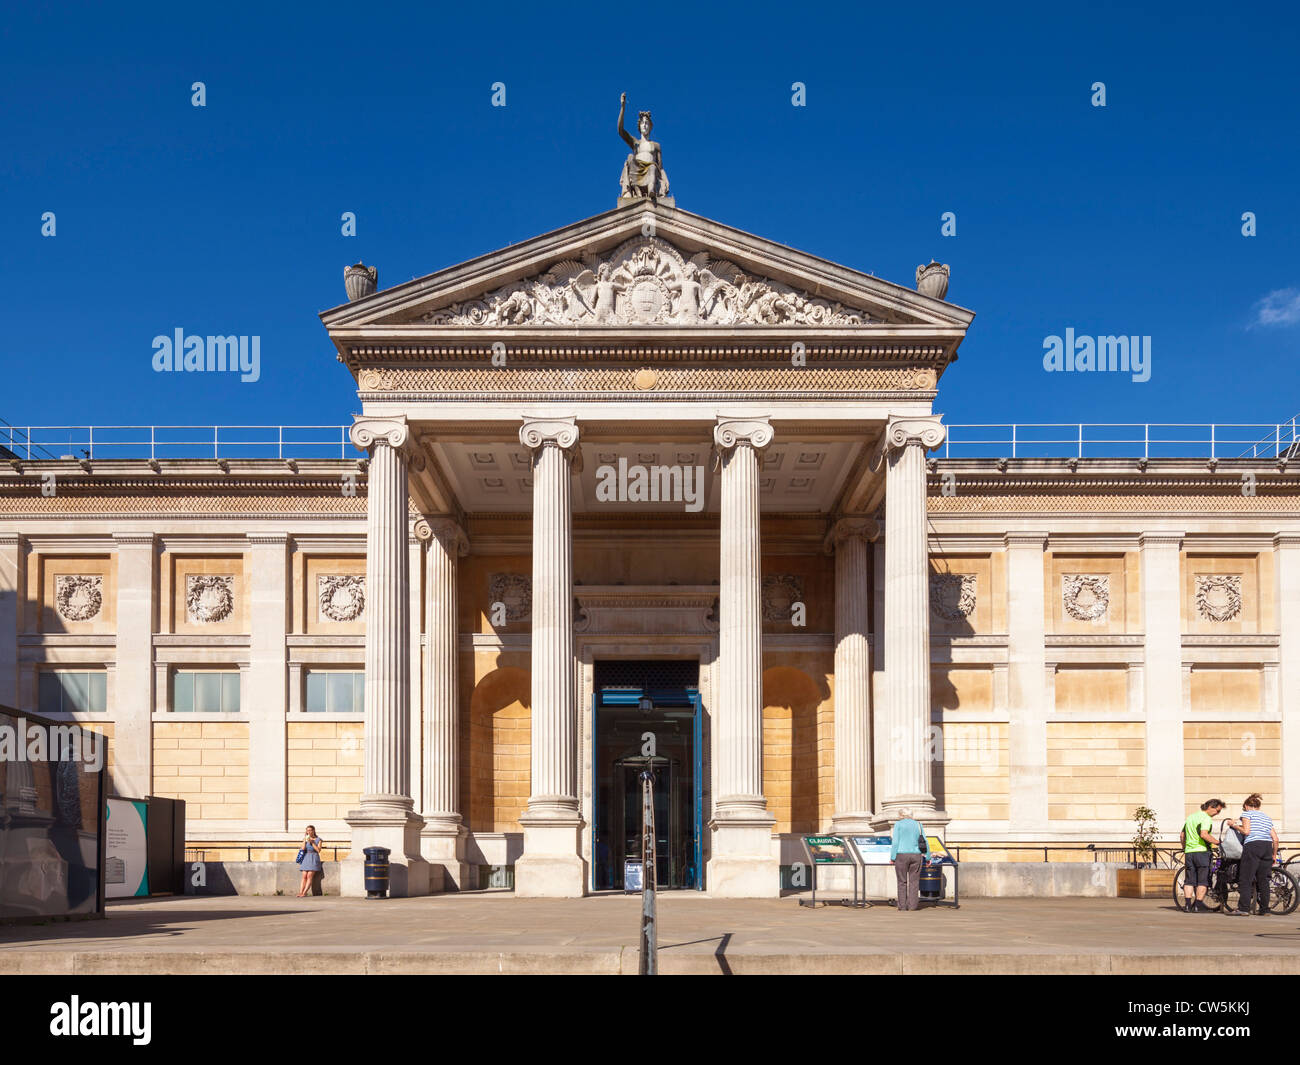 Ashmolean Museum of Art and Archaeology, Oxford Stock Photo